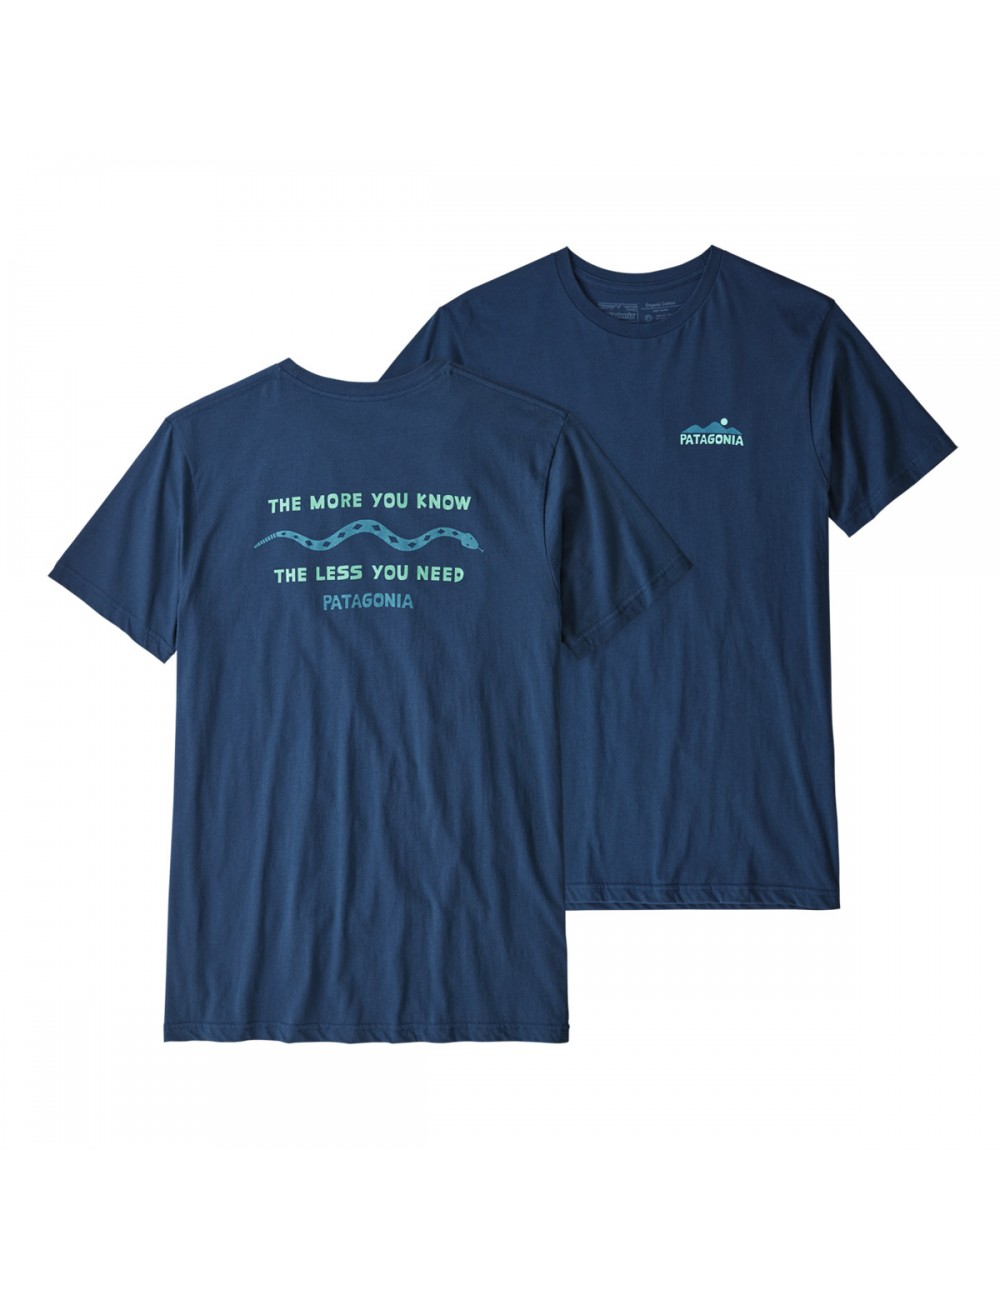 Patagonia The Less You Need Shirt - Blue